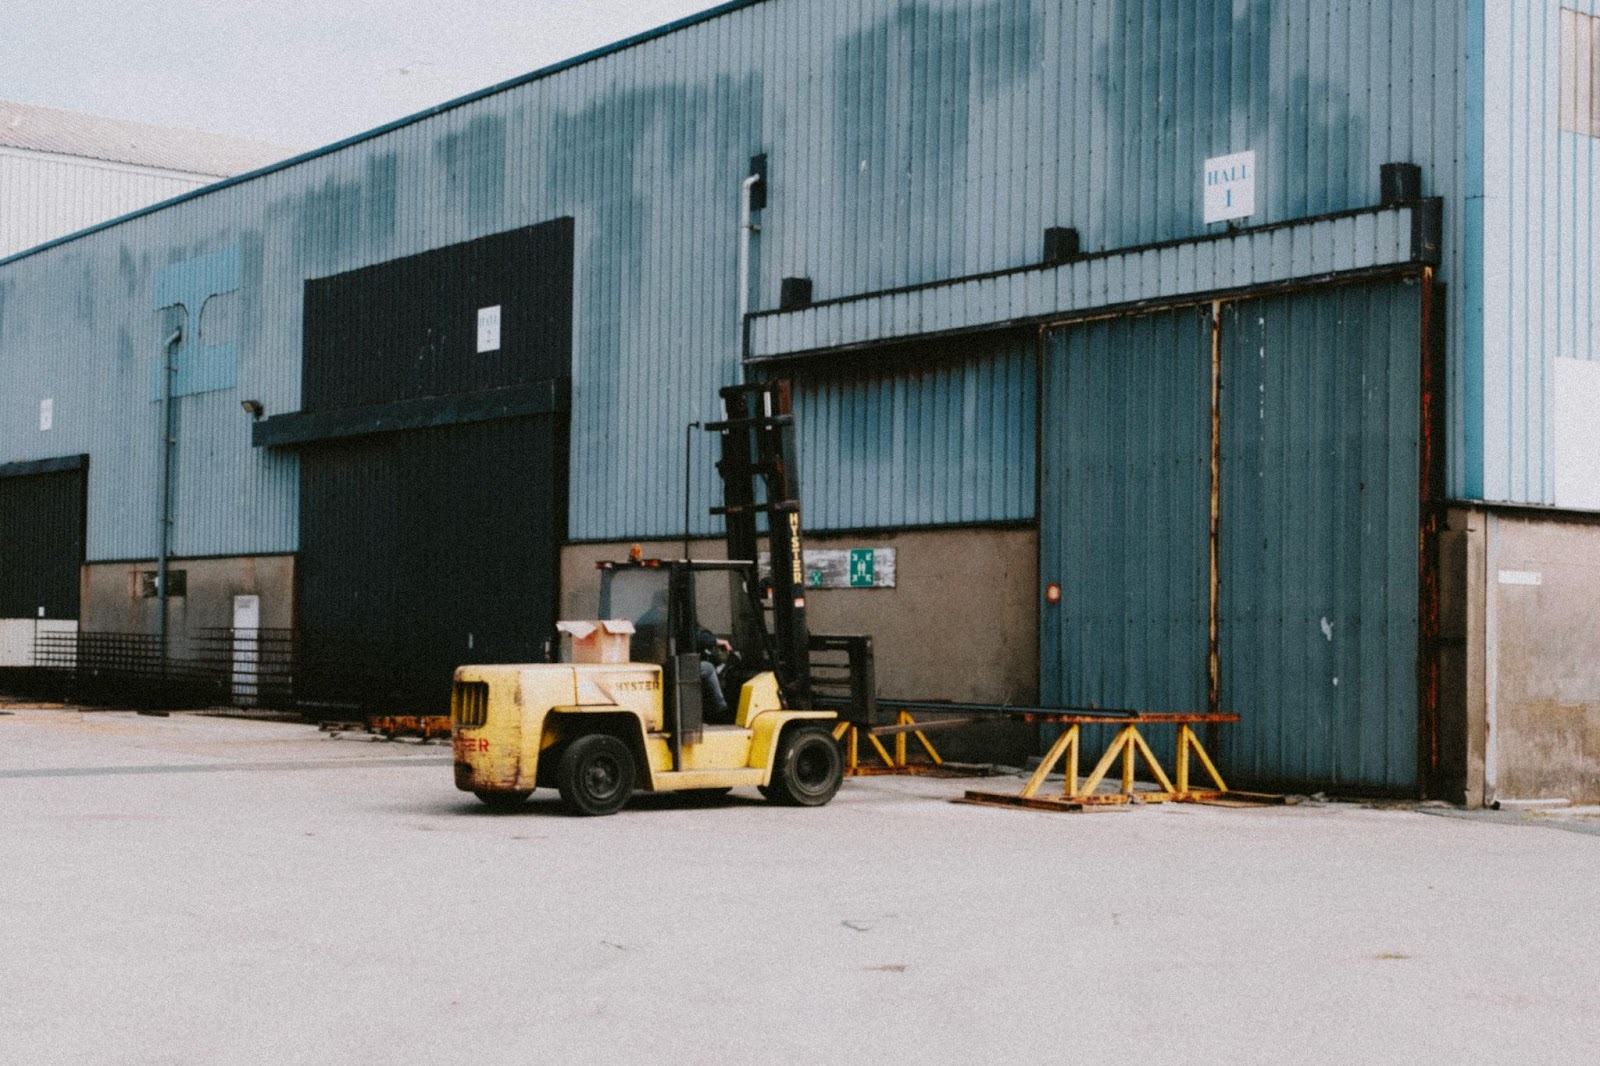 A yellow forklift outside a warehouse shipping yard